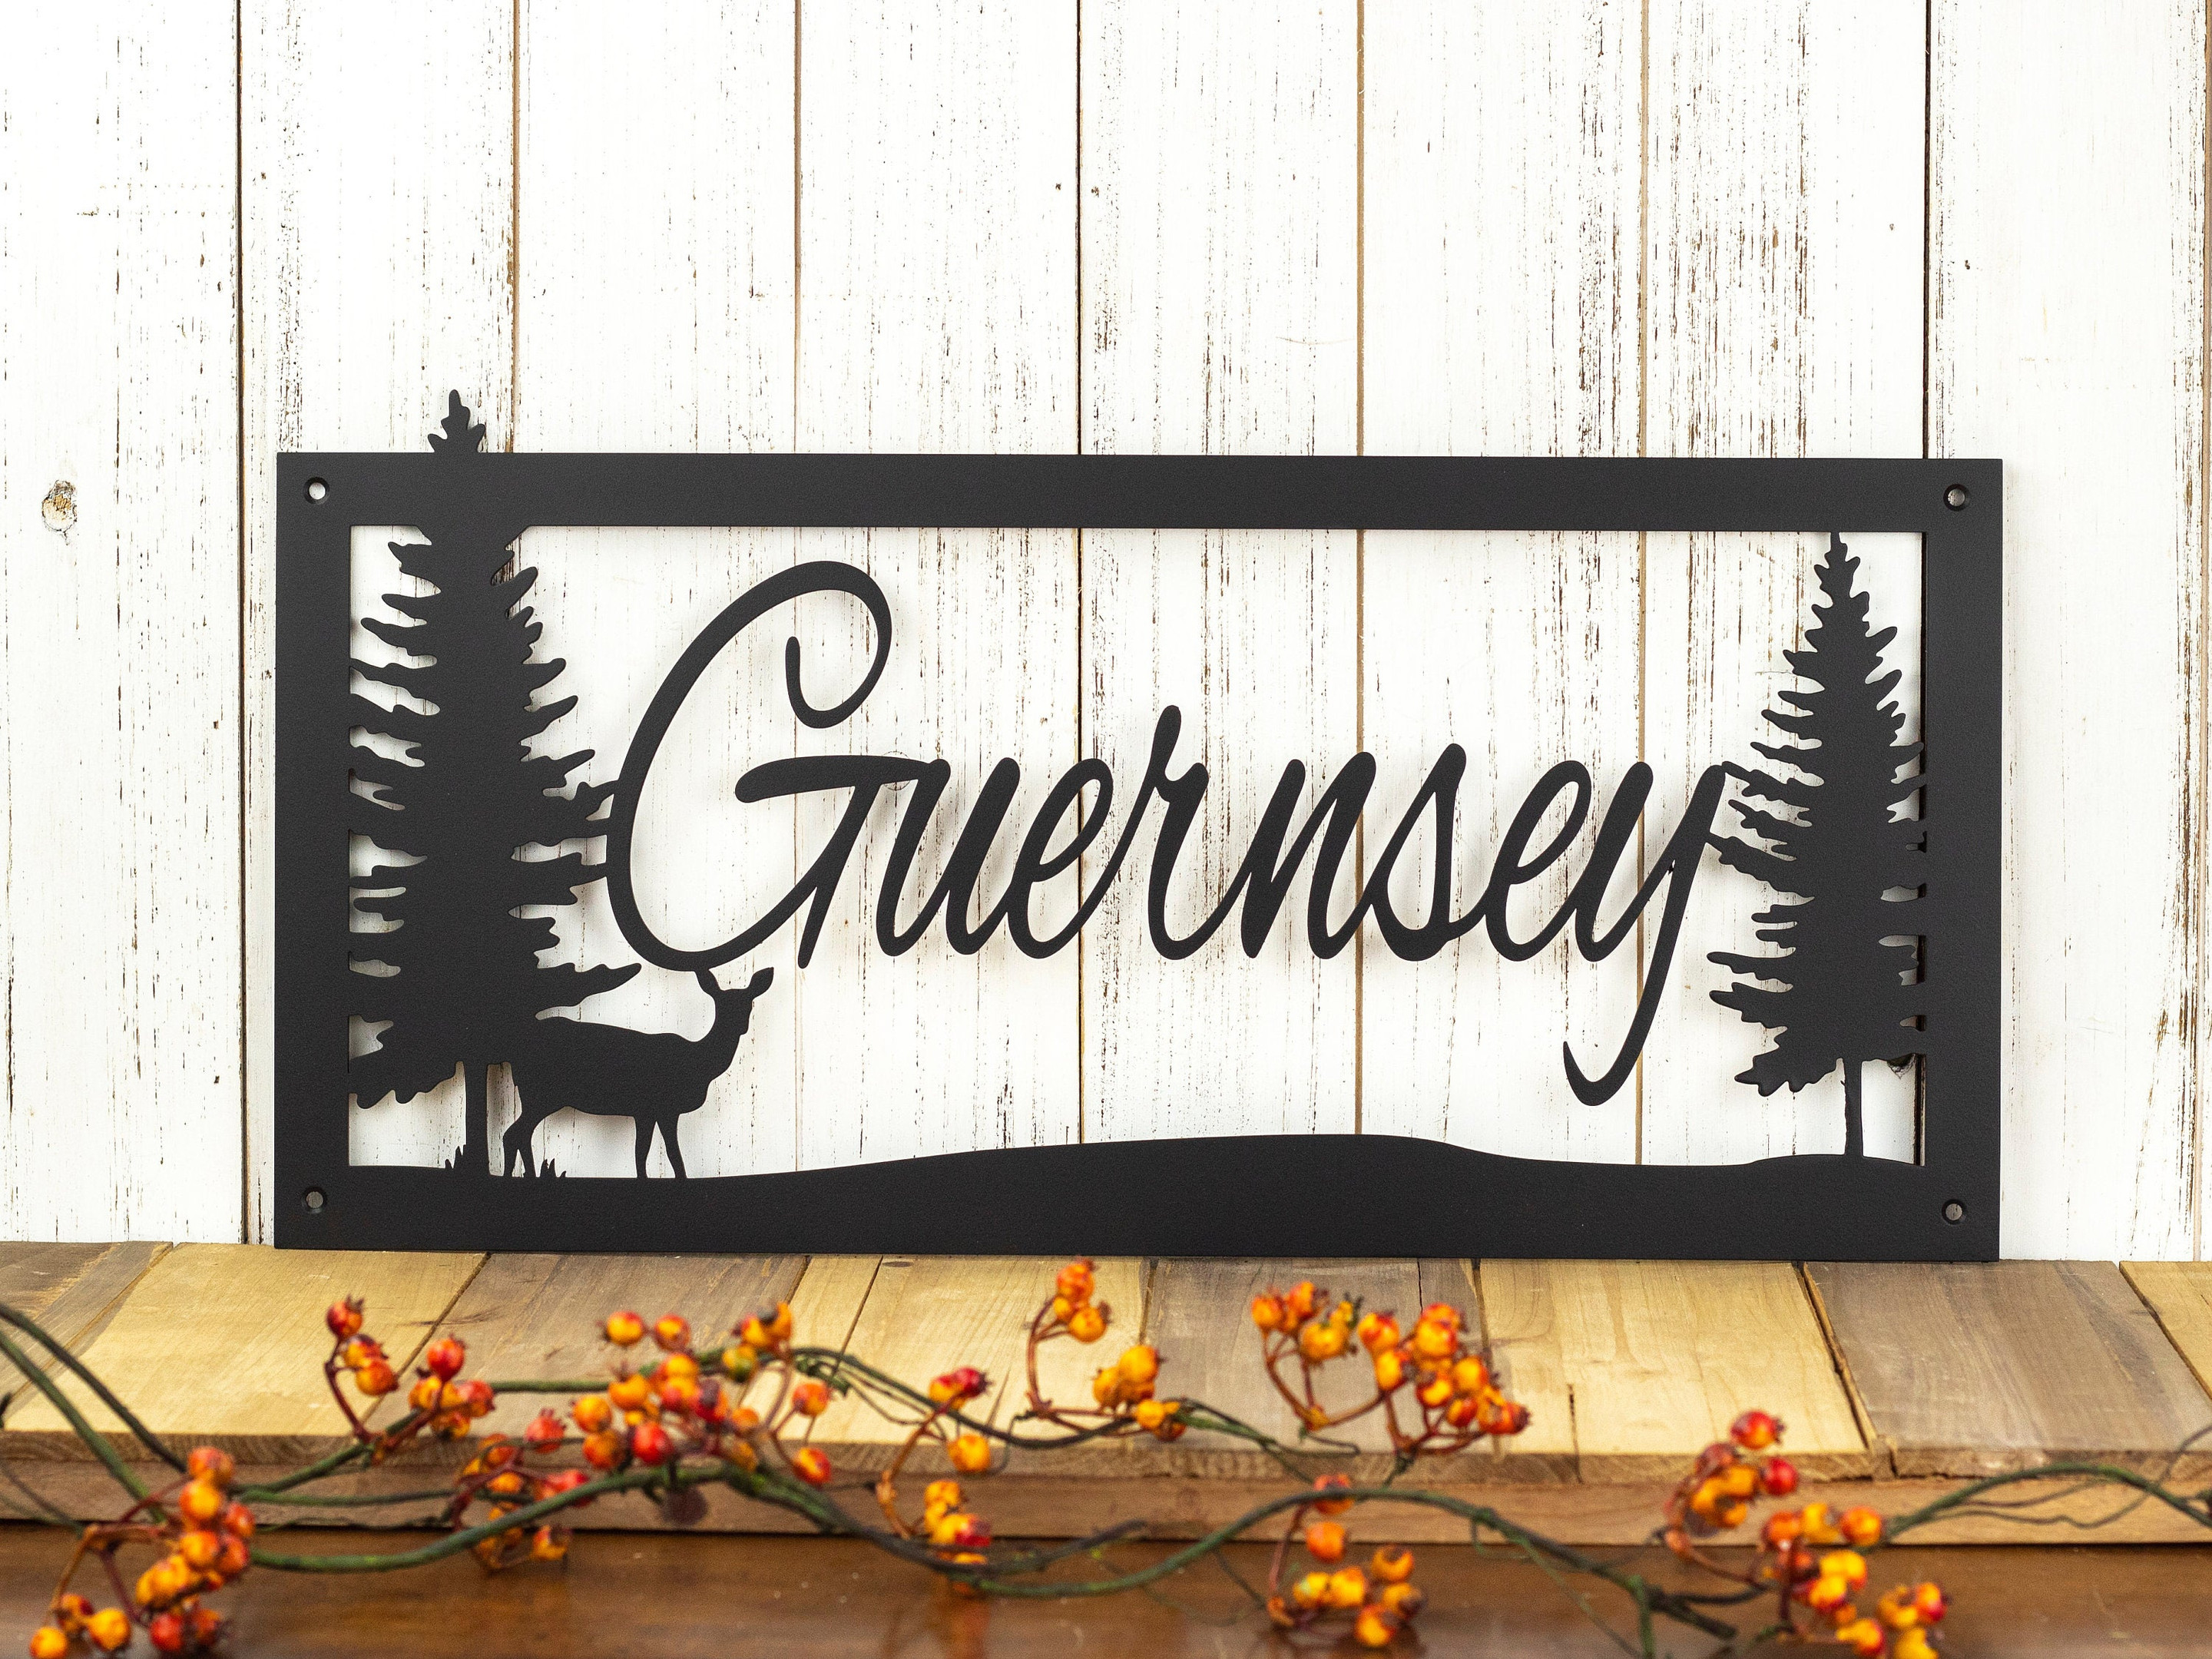 Last Name Sign, Metal Signs Personalized, Custom Metal Sign, Lake House Decor, Rustic Home Decor, Laser Cut Sign, Matte Black Shown, Laser Cut Metal Signs Custom Gift Ideas 12x12IN